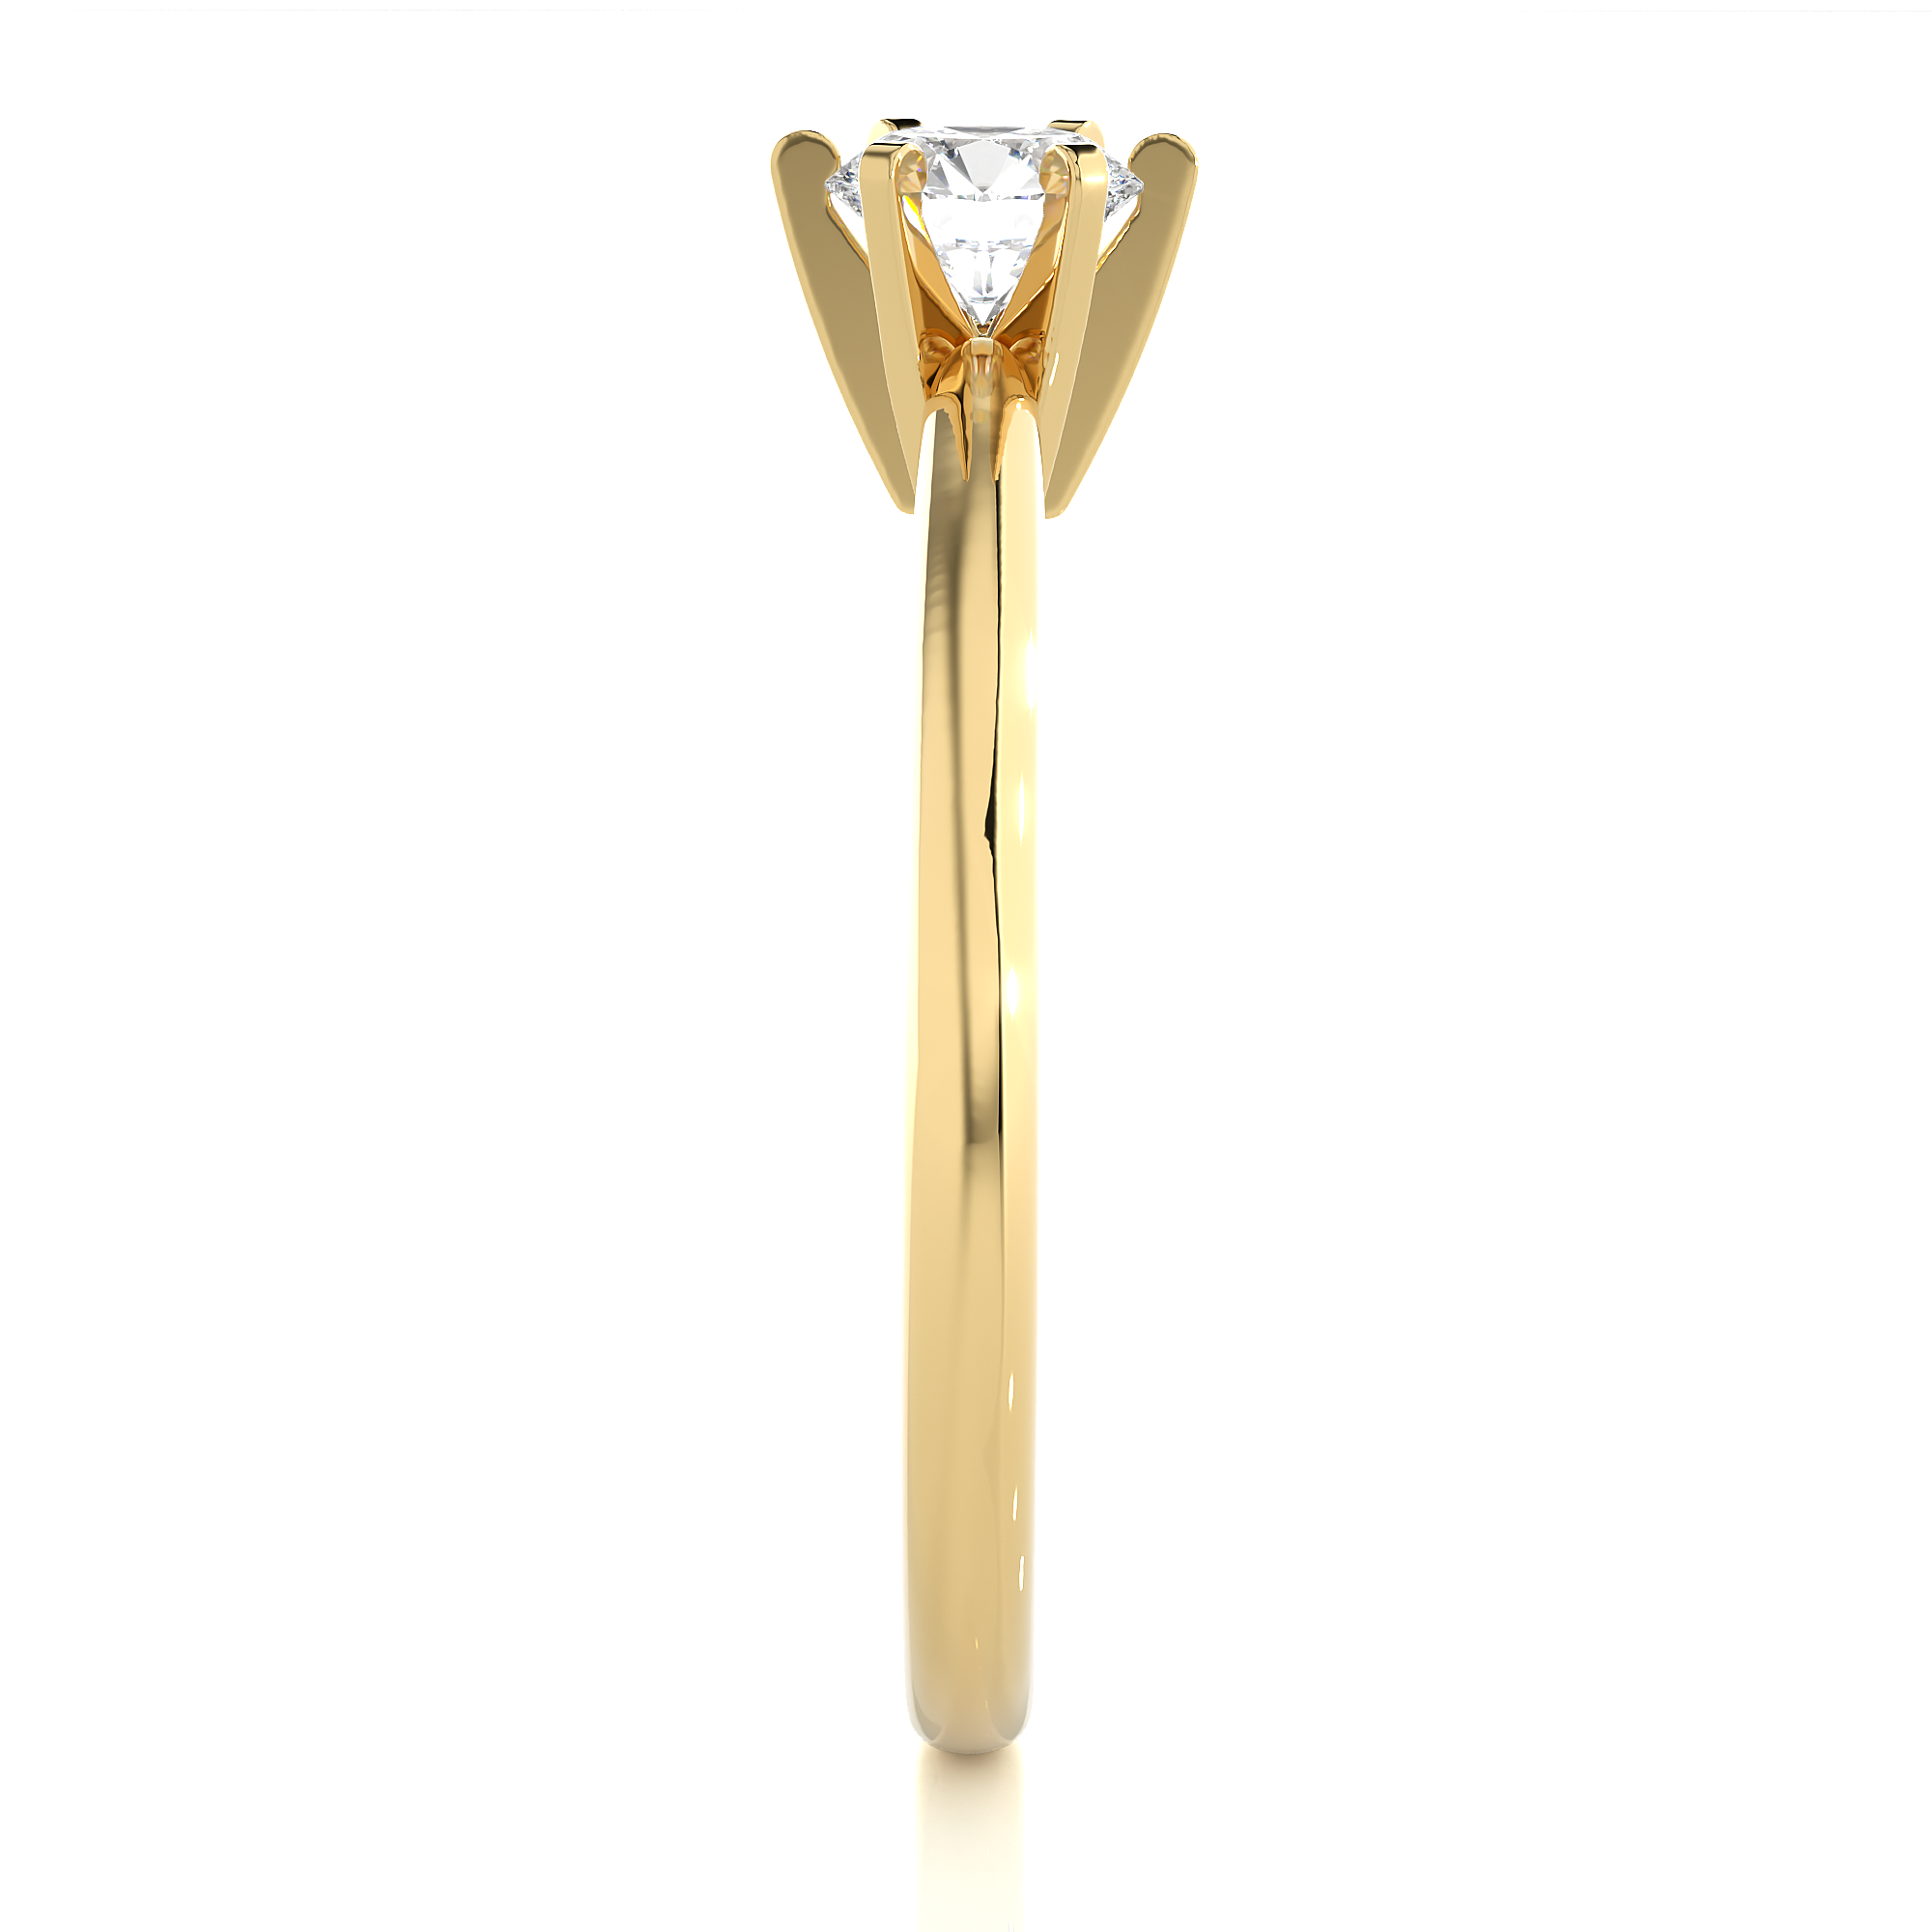 Opria Solitaire Lab Grown Diamond Ring